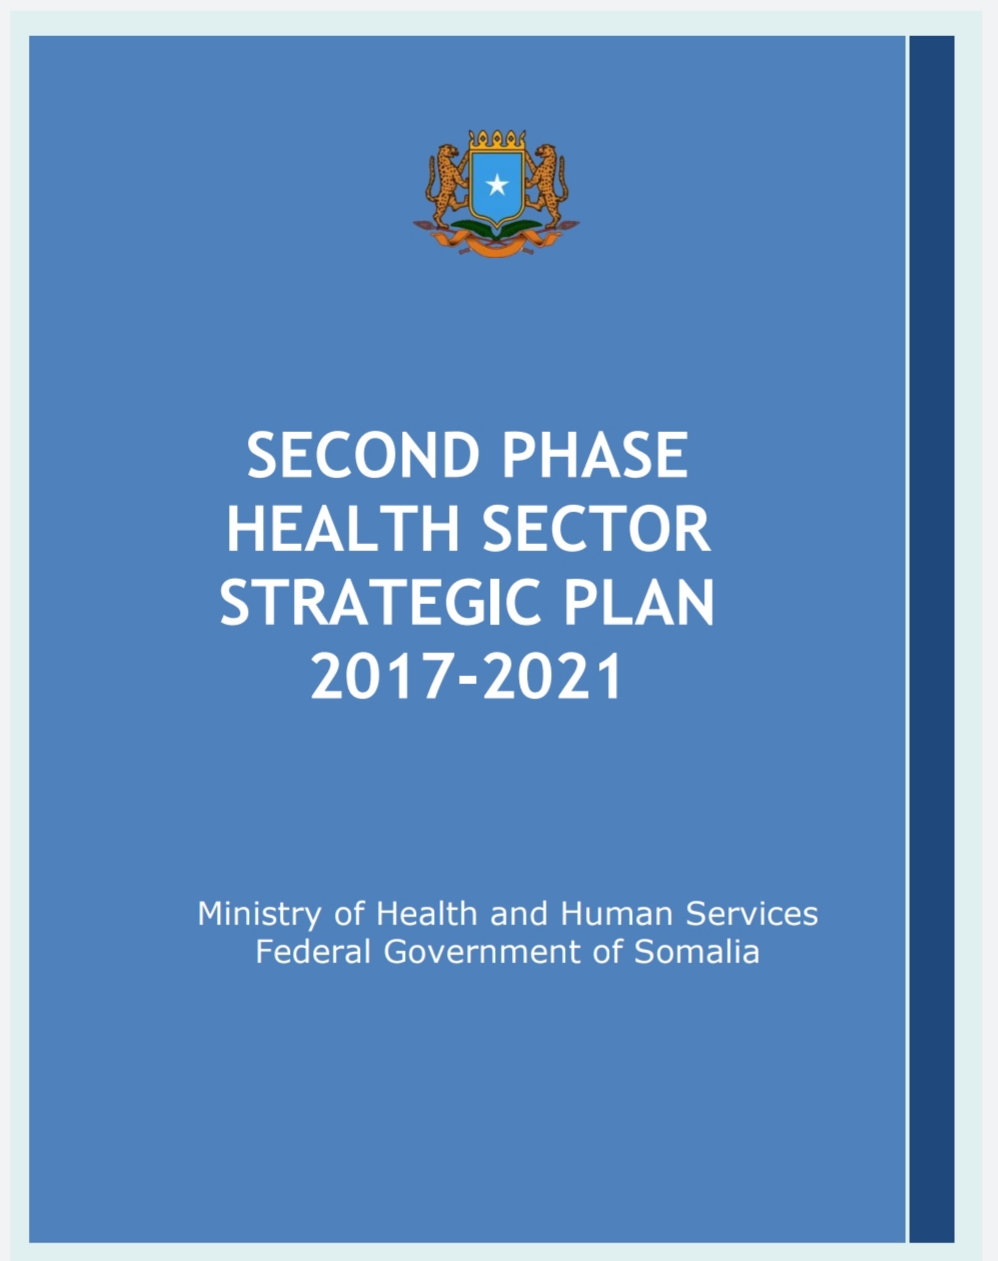 SECOND PHASE  HEALTH SECTOR  STRATEGIC PLAN  2017-2021